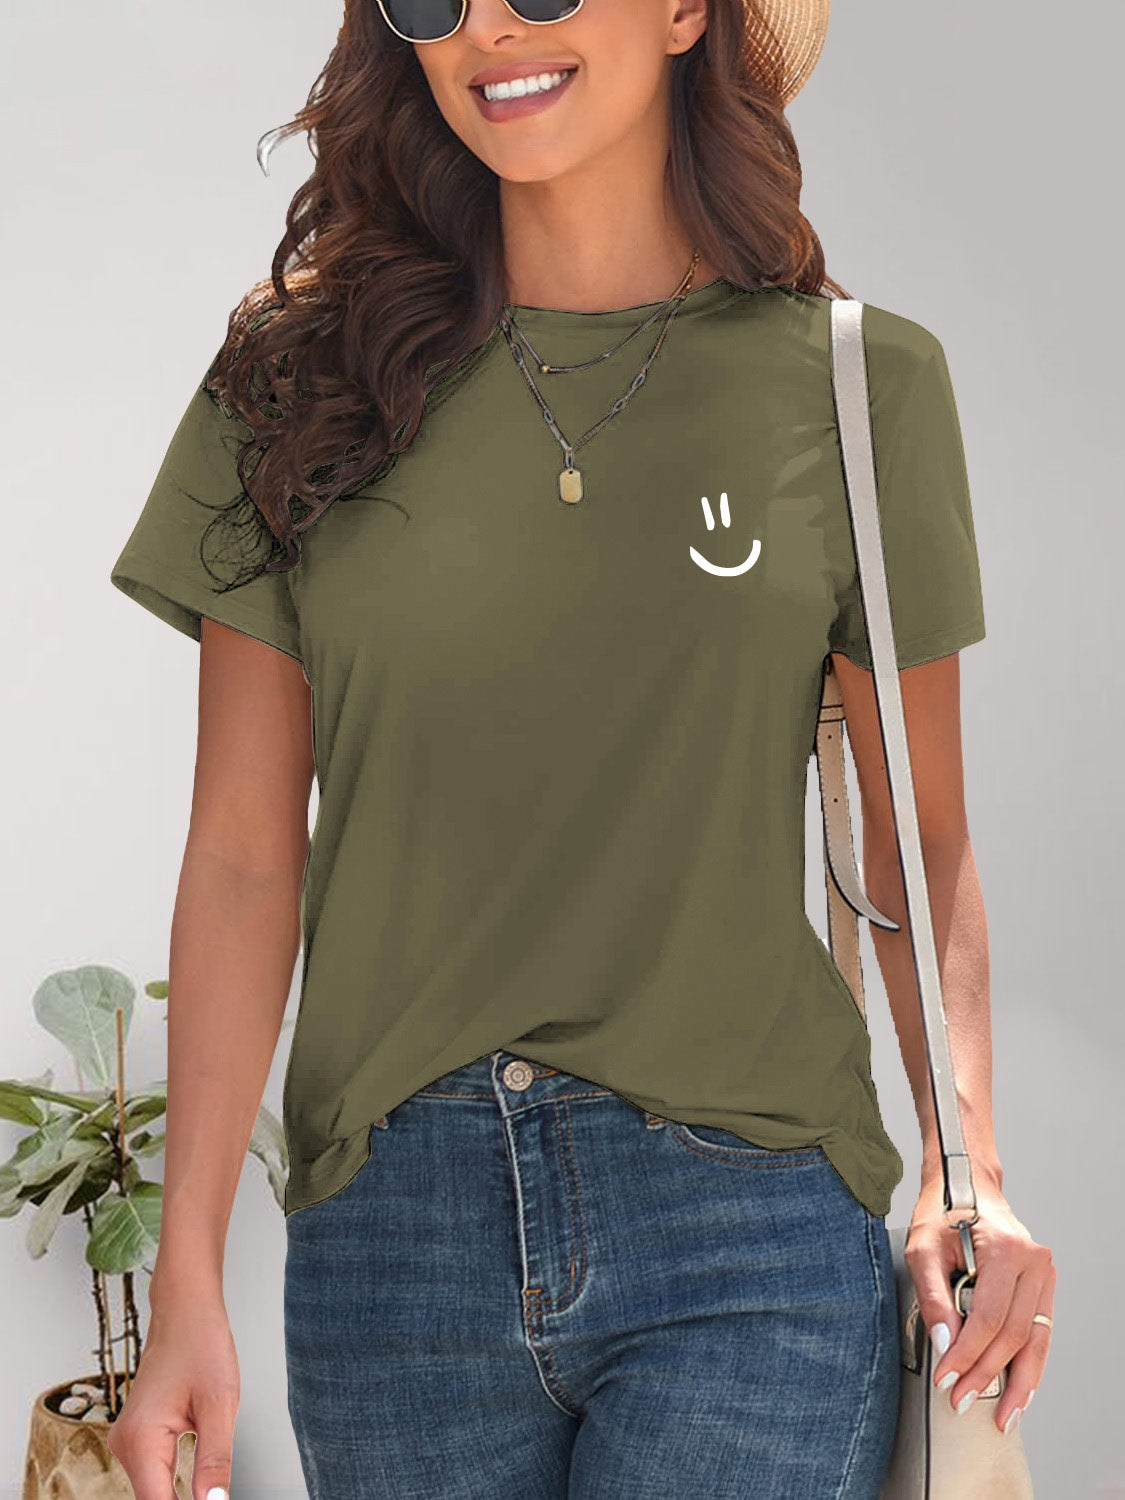 Smile Graphic Round Neck Short Sleeve T-Shirt Moss S 